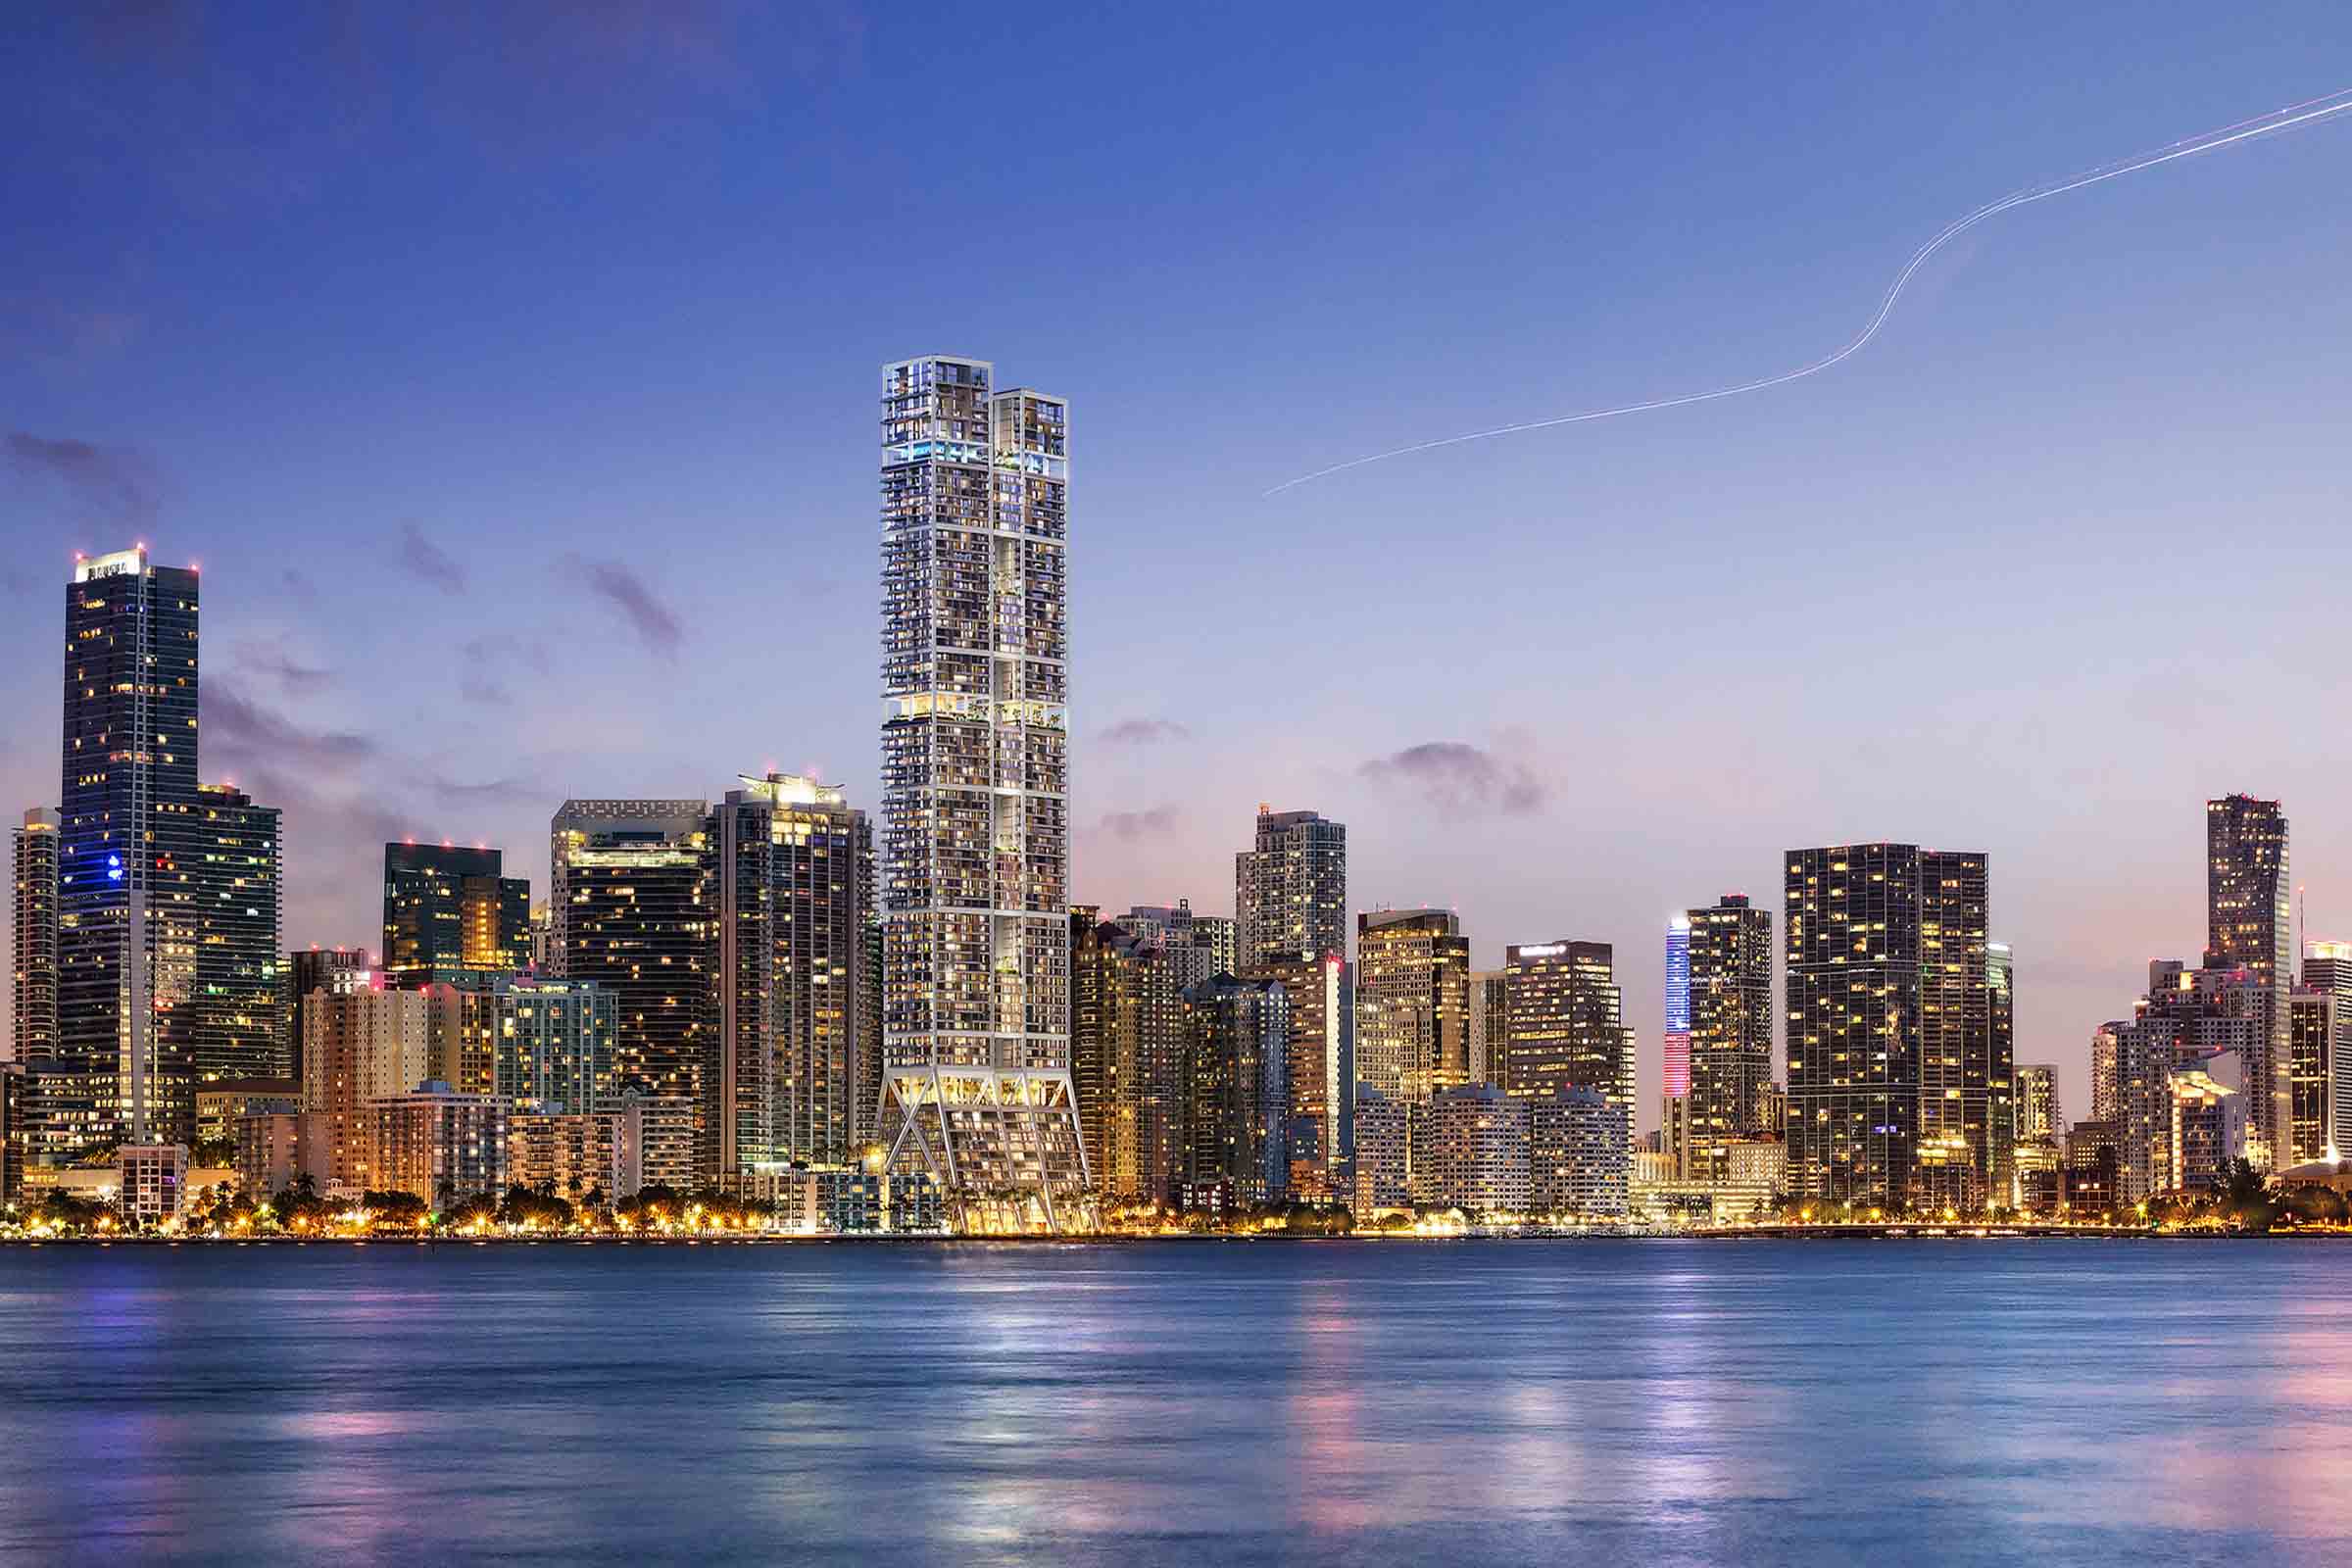 Brickell Waterfront Development Site At 1201 Brickell Bay Dr Sells For $363M